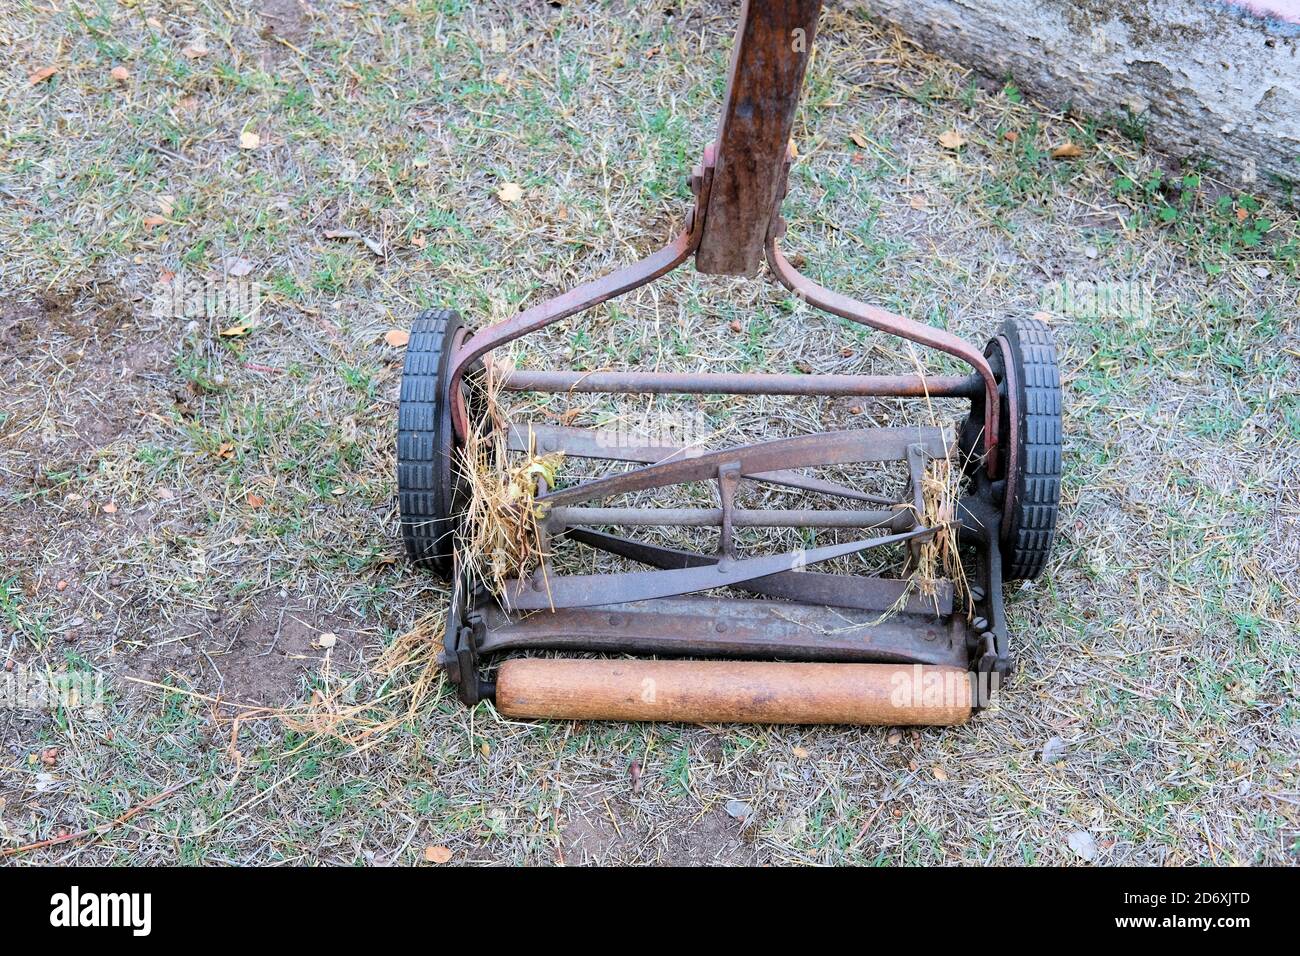 Blades and wooden roller of an SA Special push lawn mower